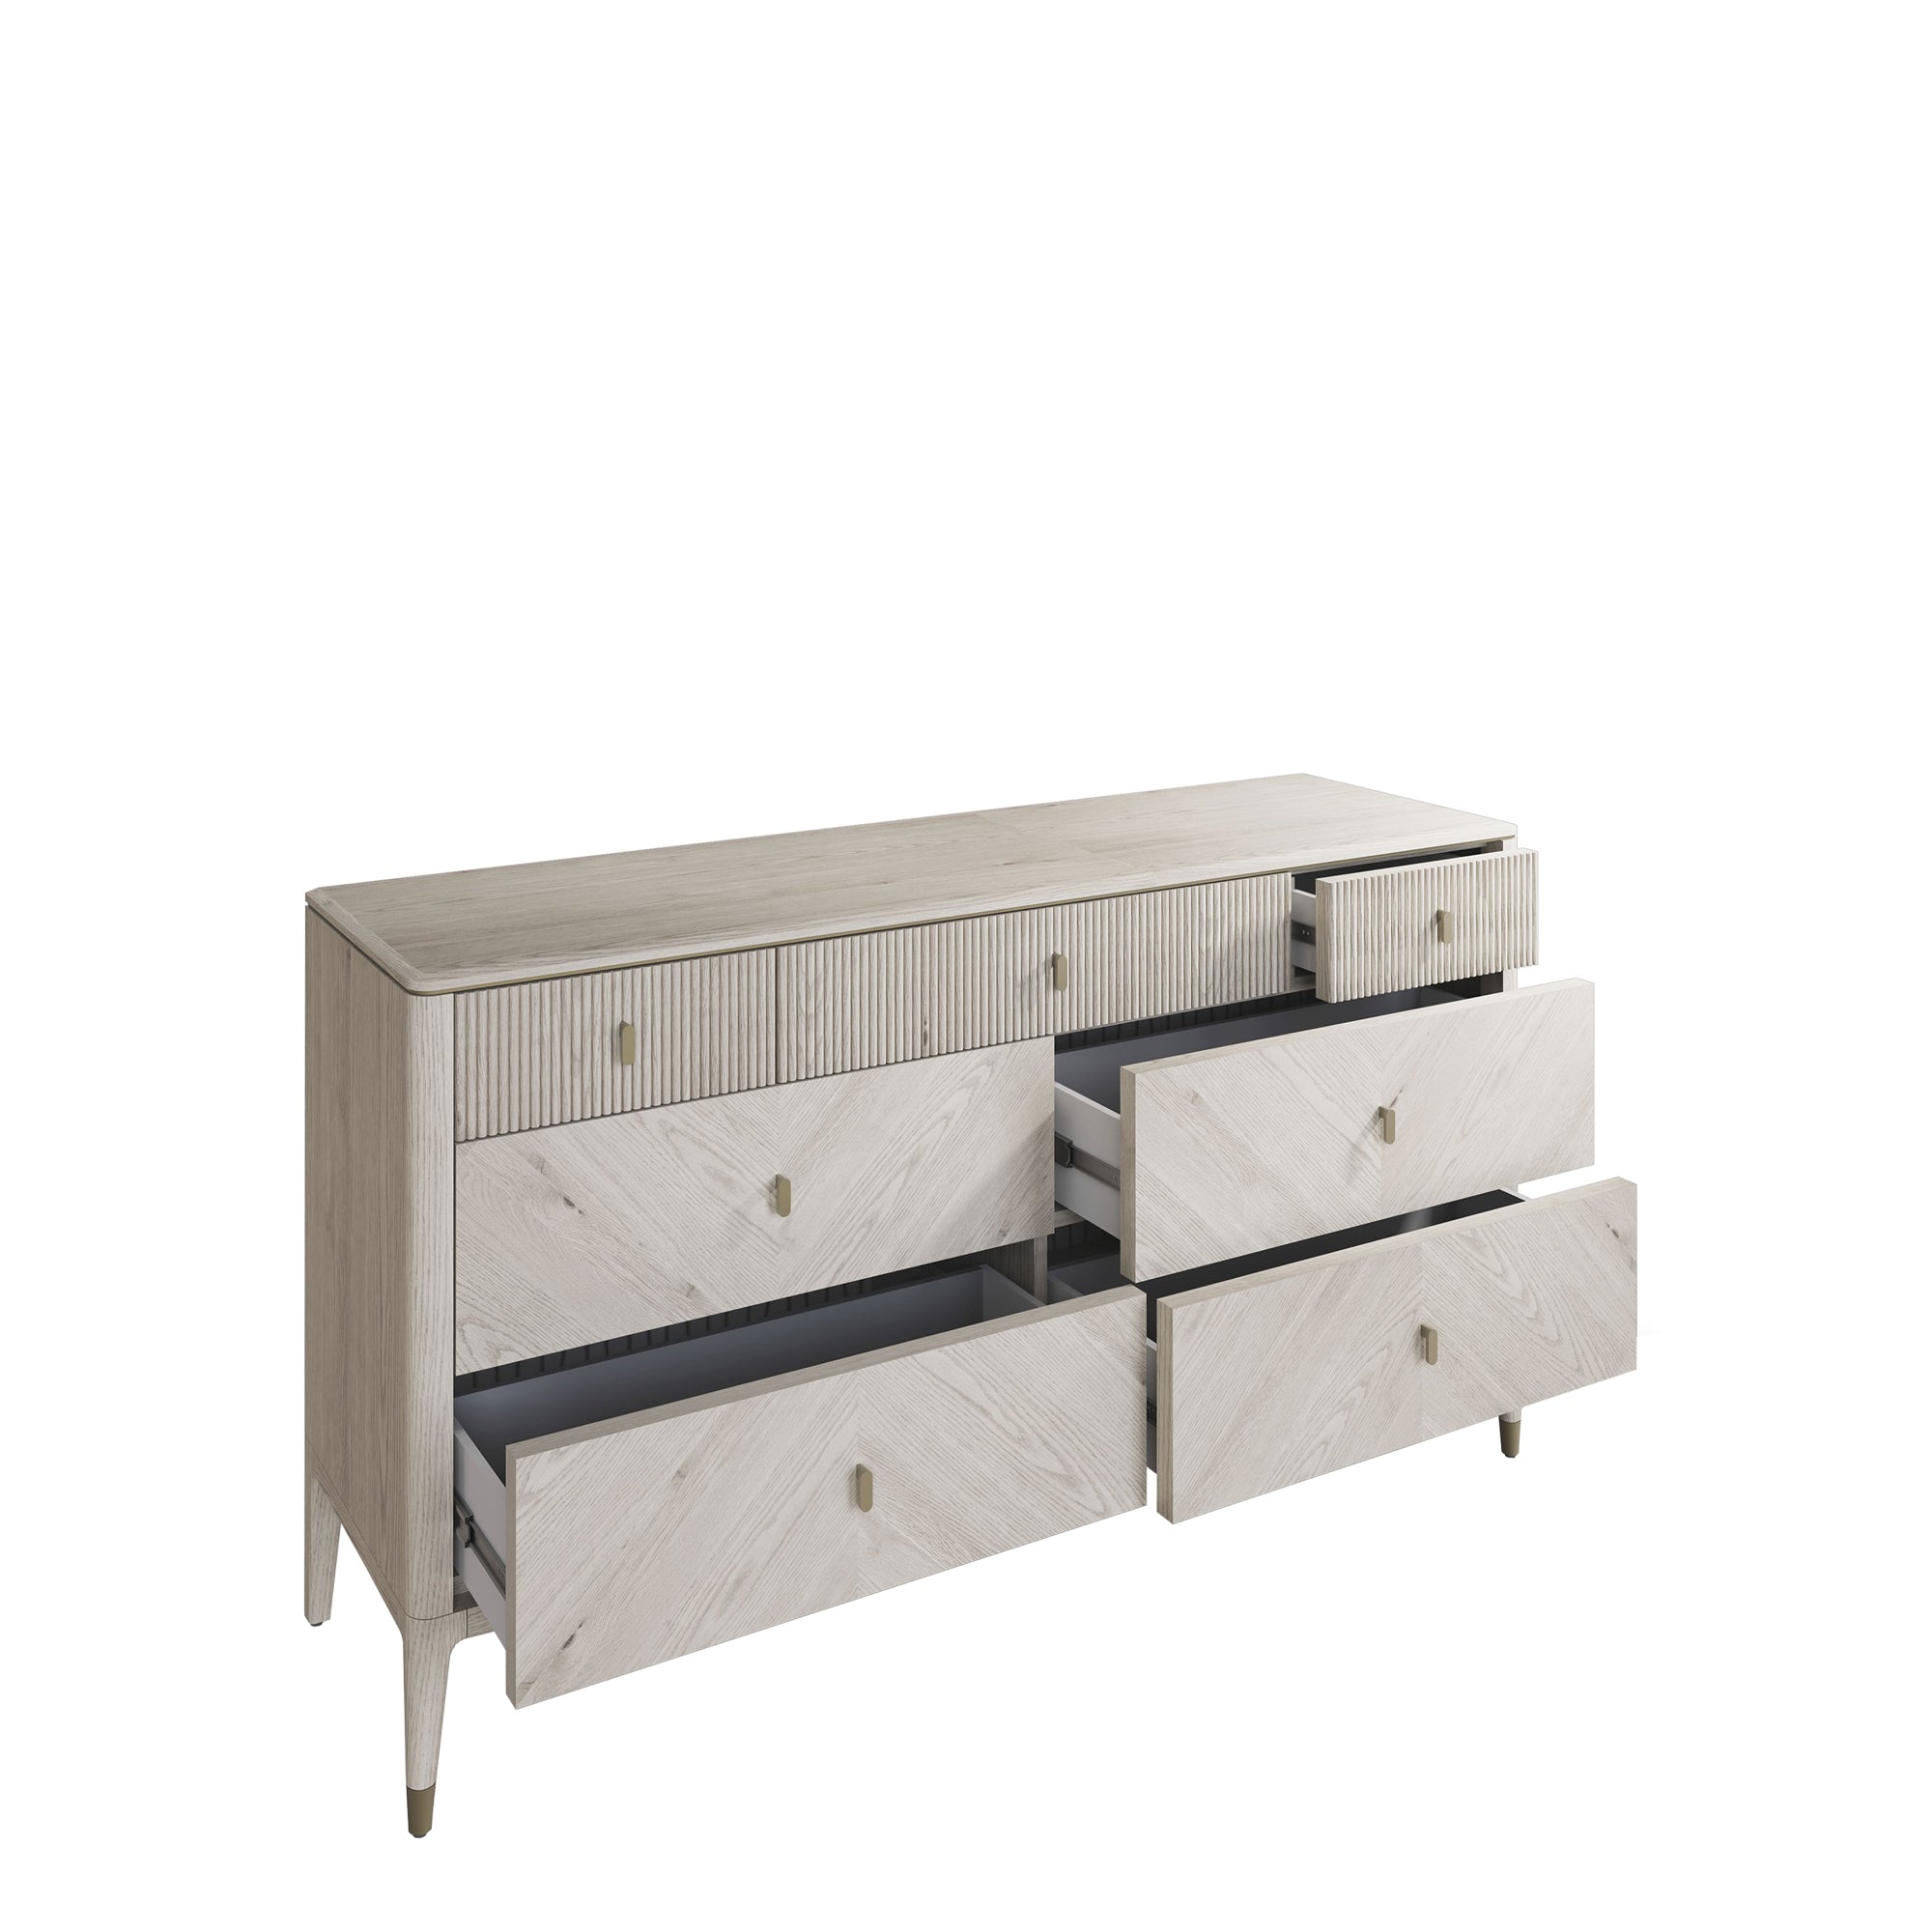 Dynasty - 7 Drawer Wide Chest In Stone Finish